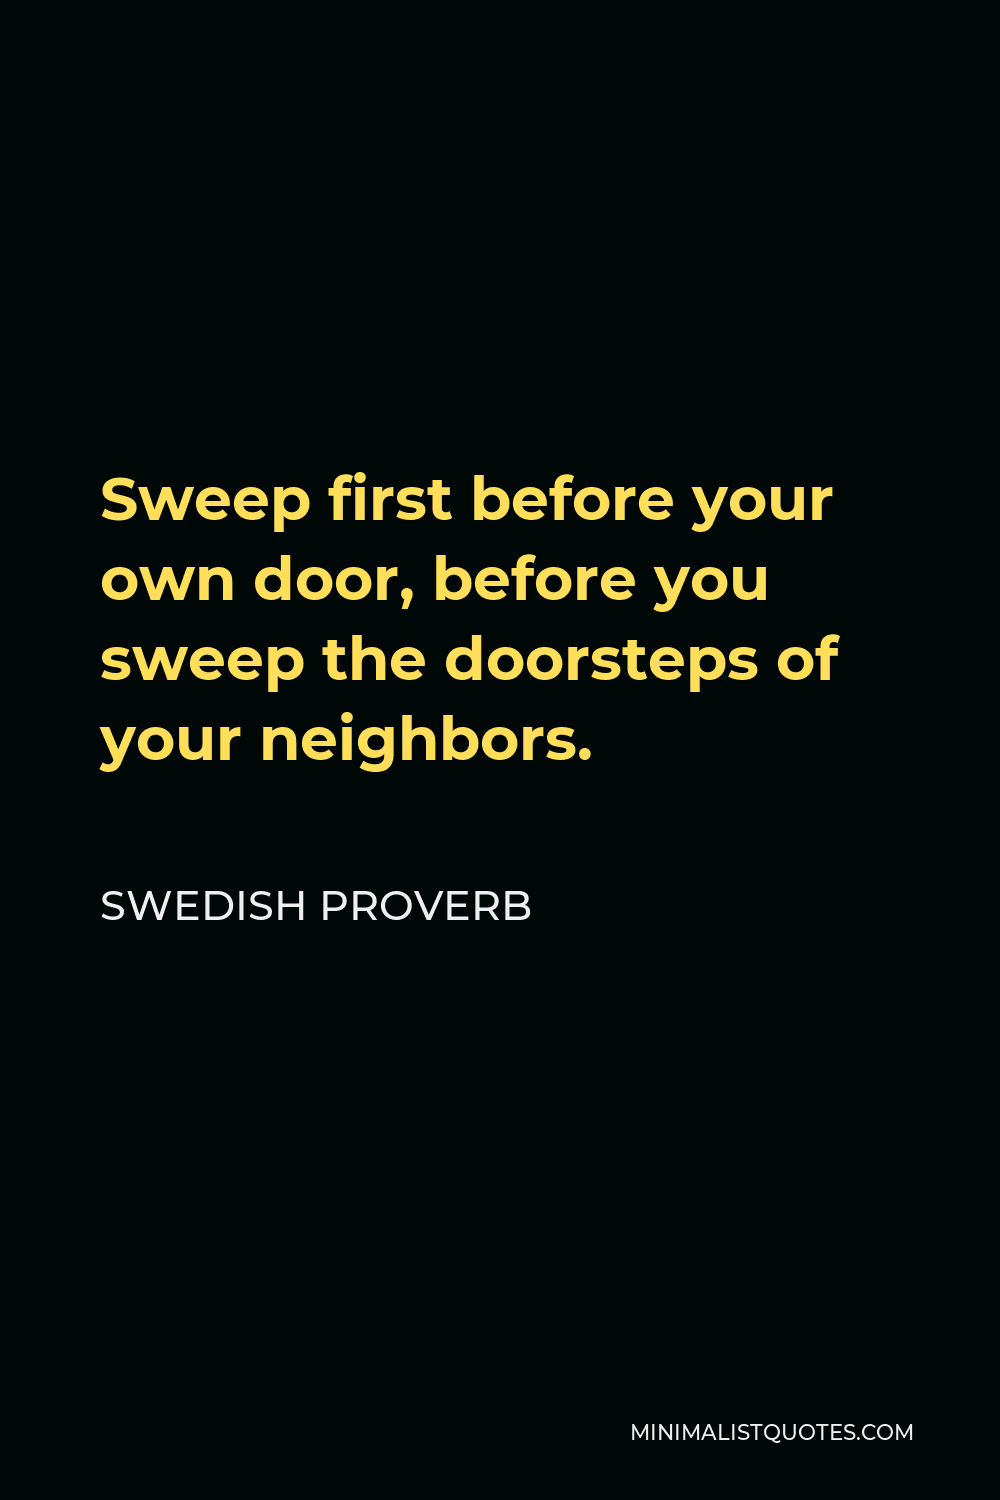 Swedish Proverb Quote - Sweep first before your own door, before you sweep the doorsteps of your neighbors.